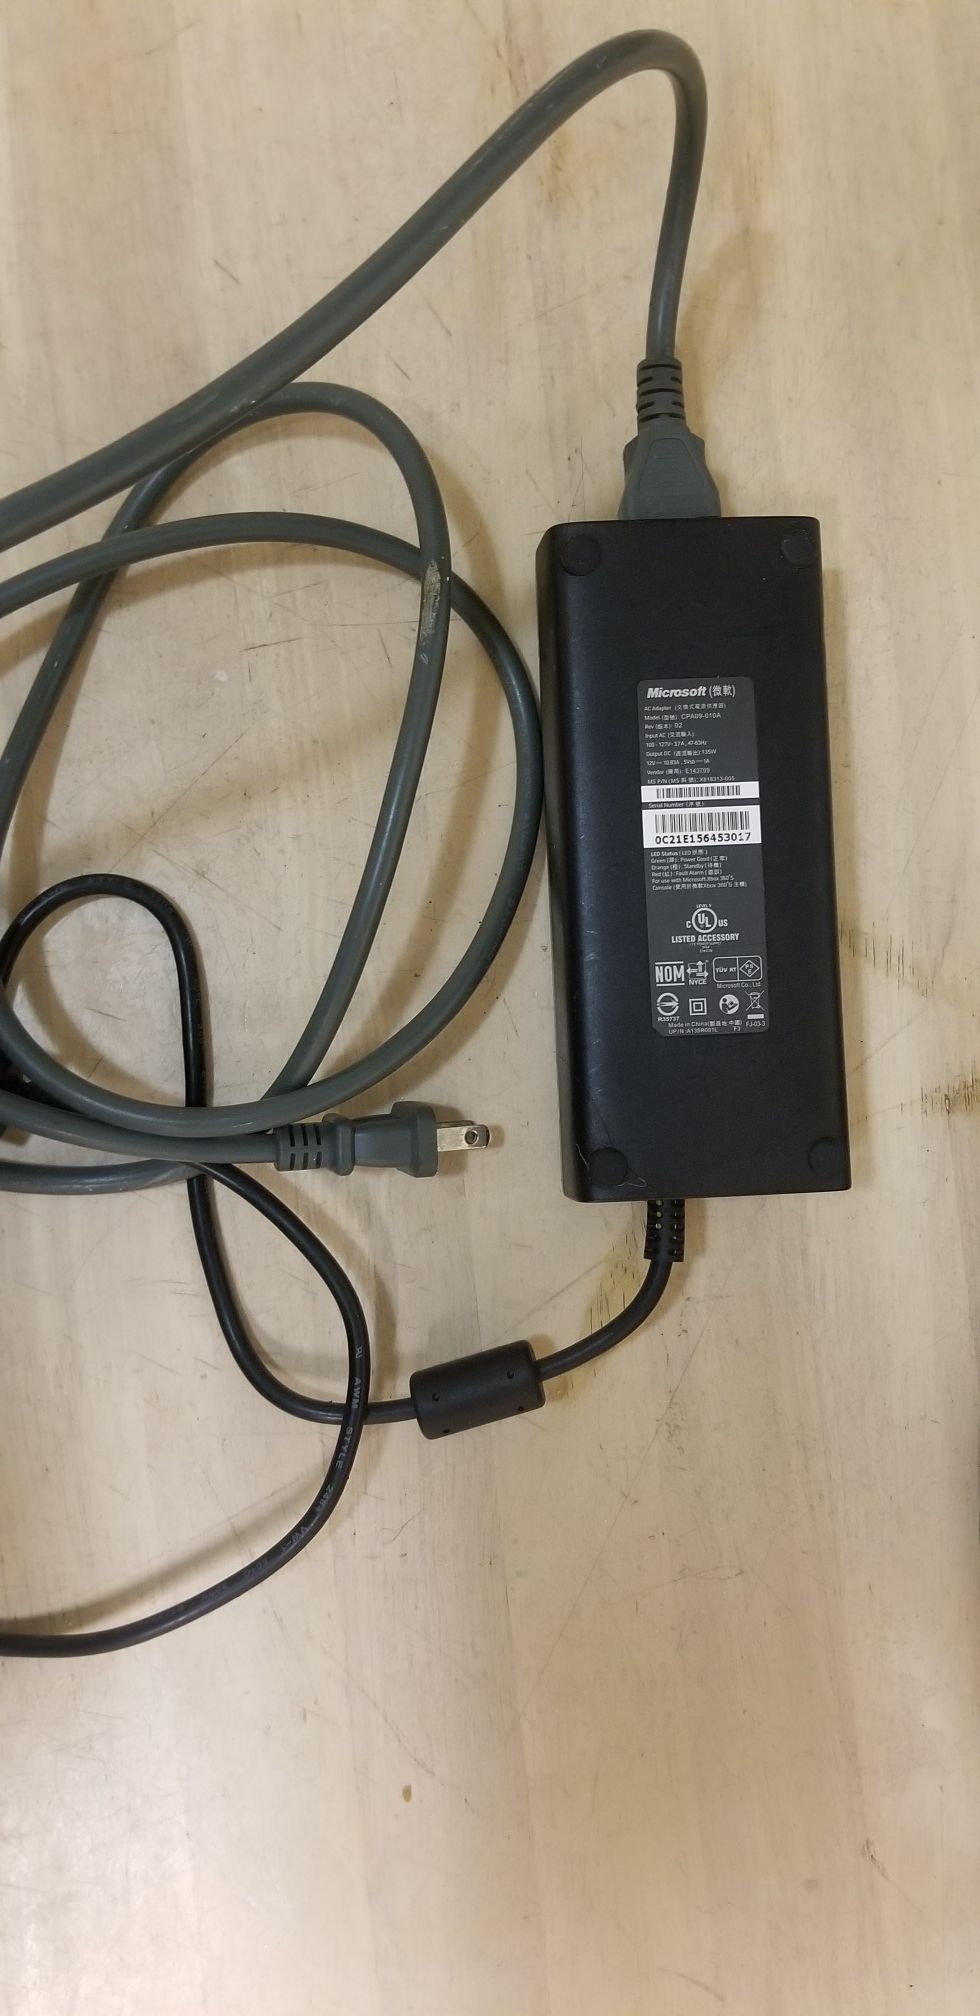 Microsoft OEM AC Adapter for Xbox 360 CPA09-010A